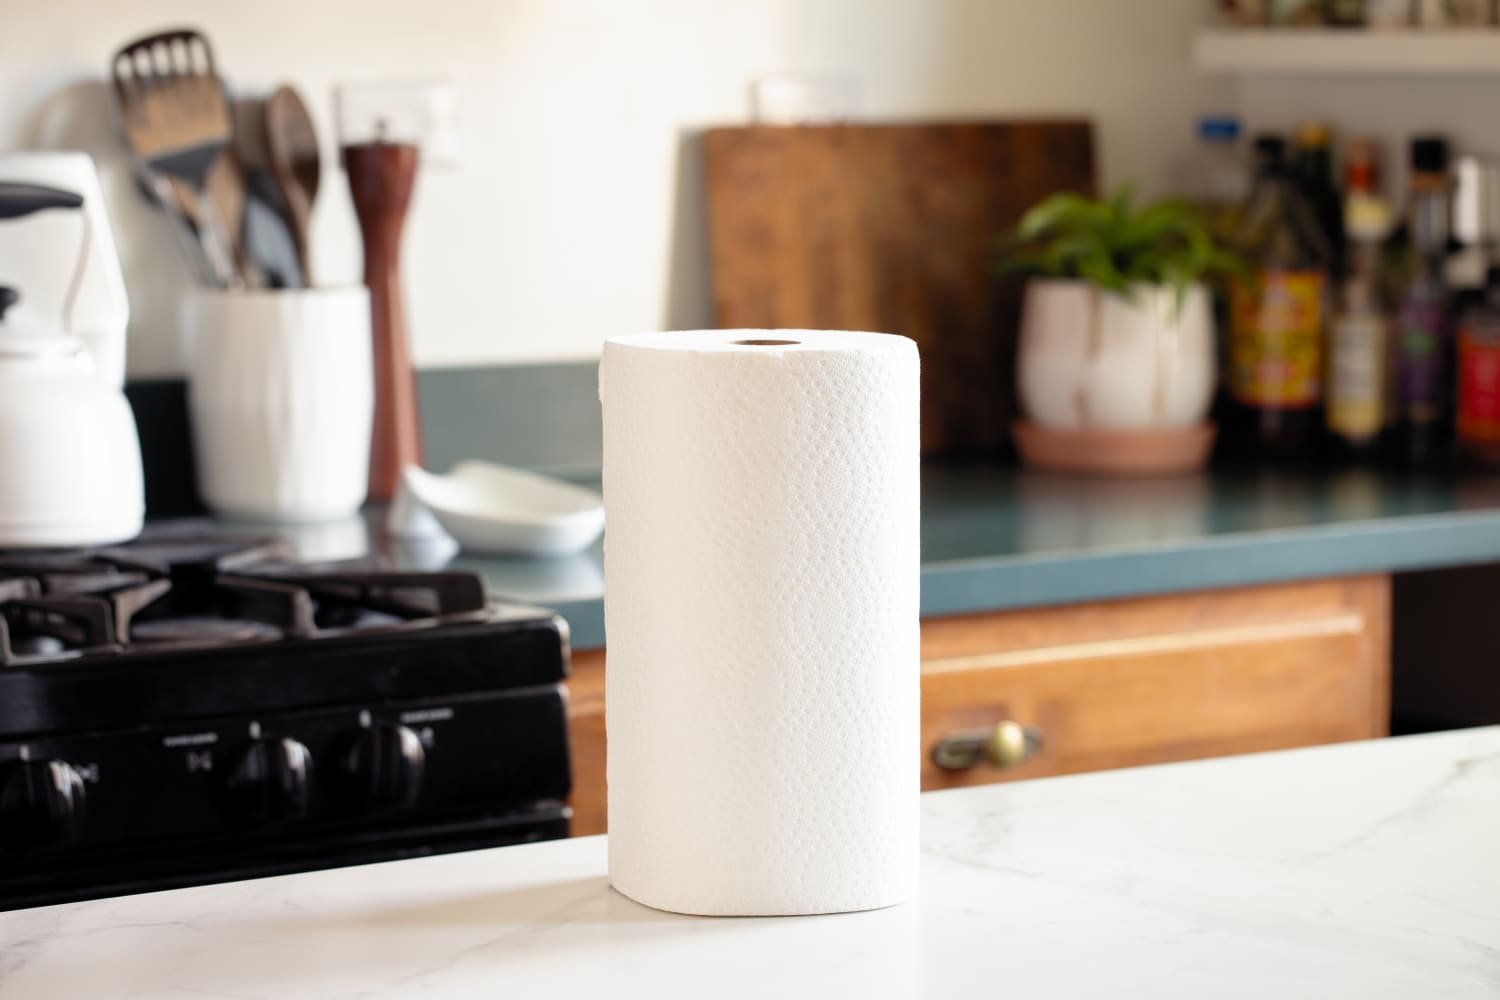 The First Thing You Should Do When You Open a New Roll of Paper Towels